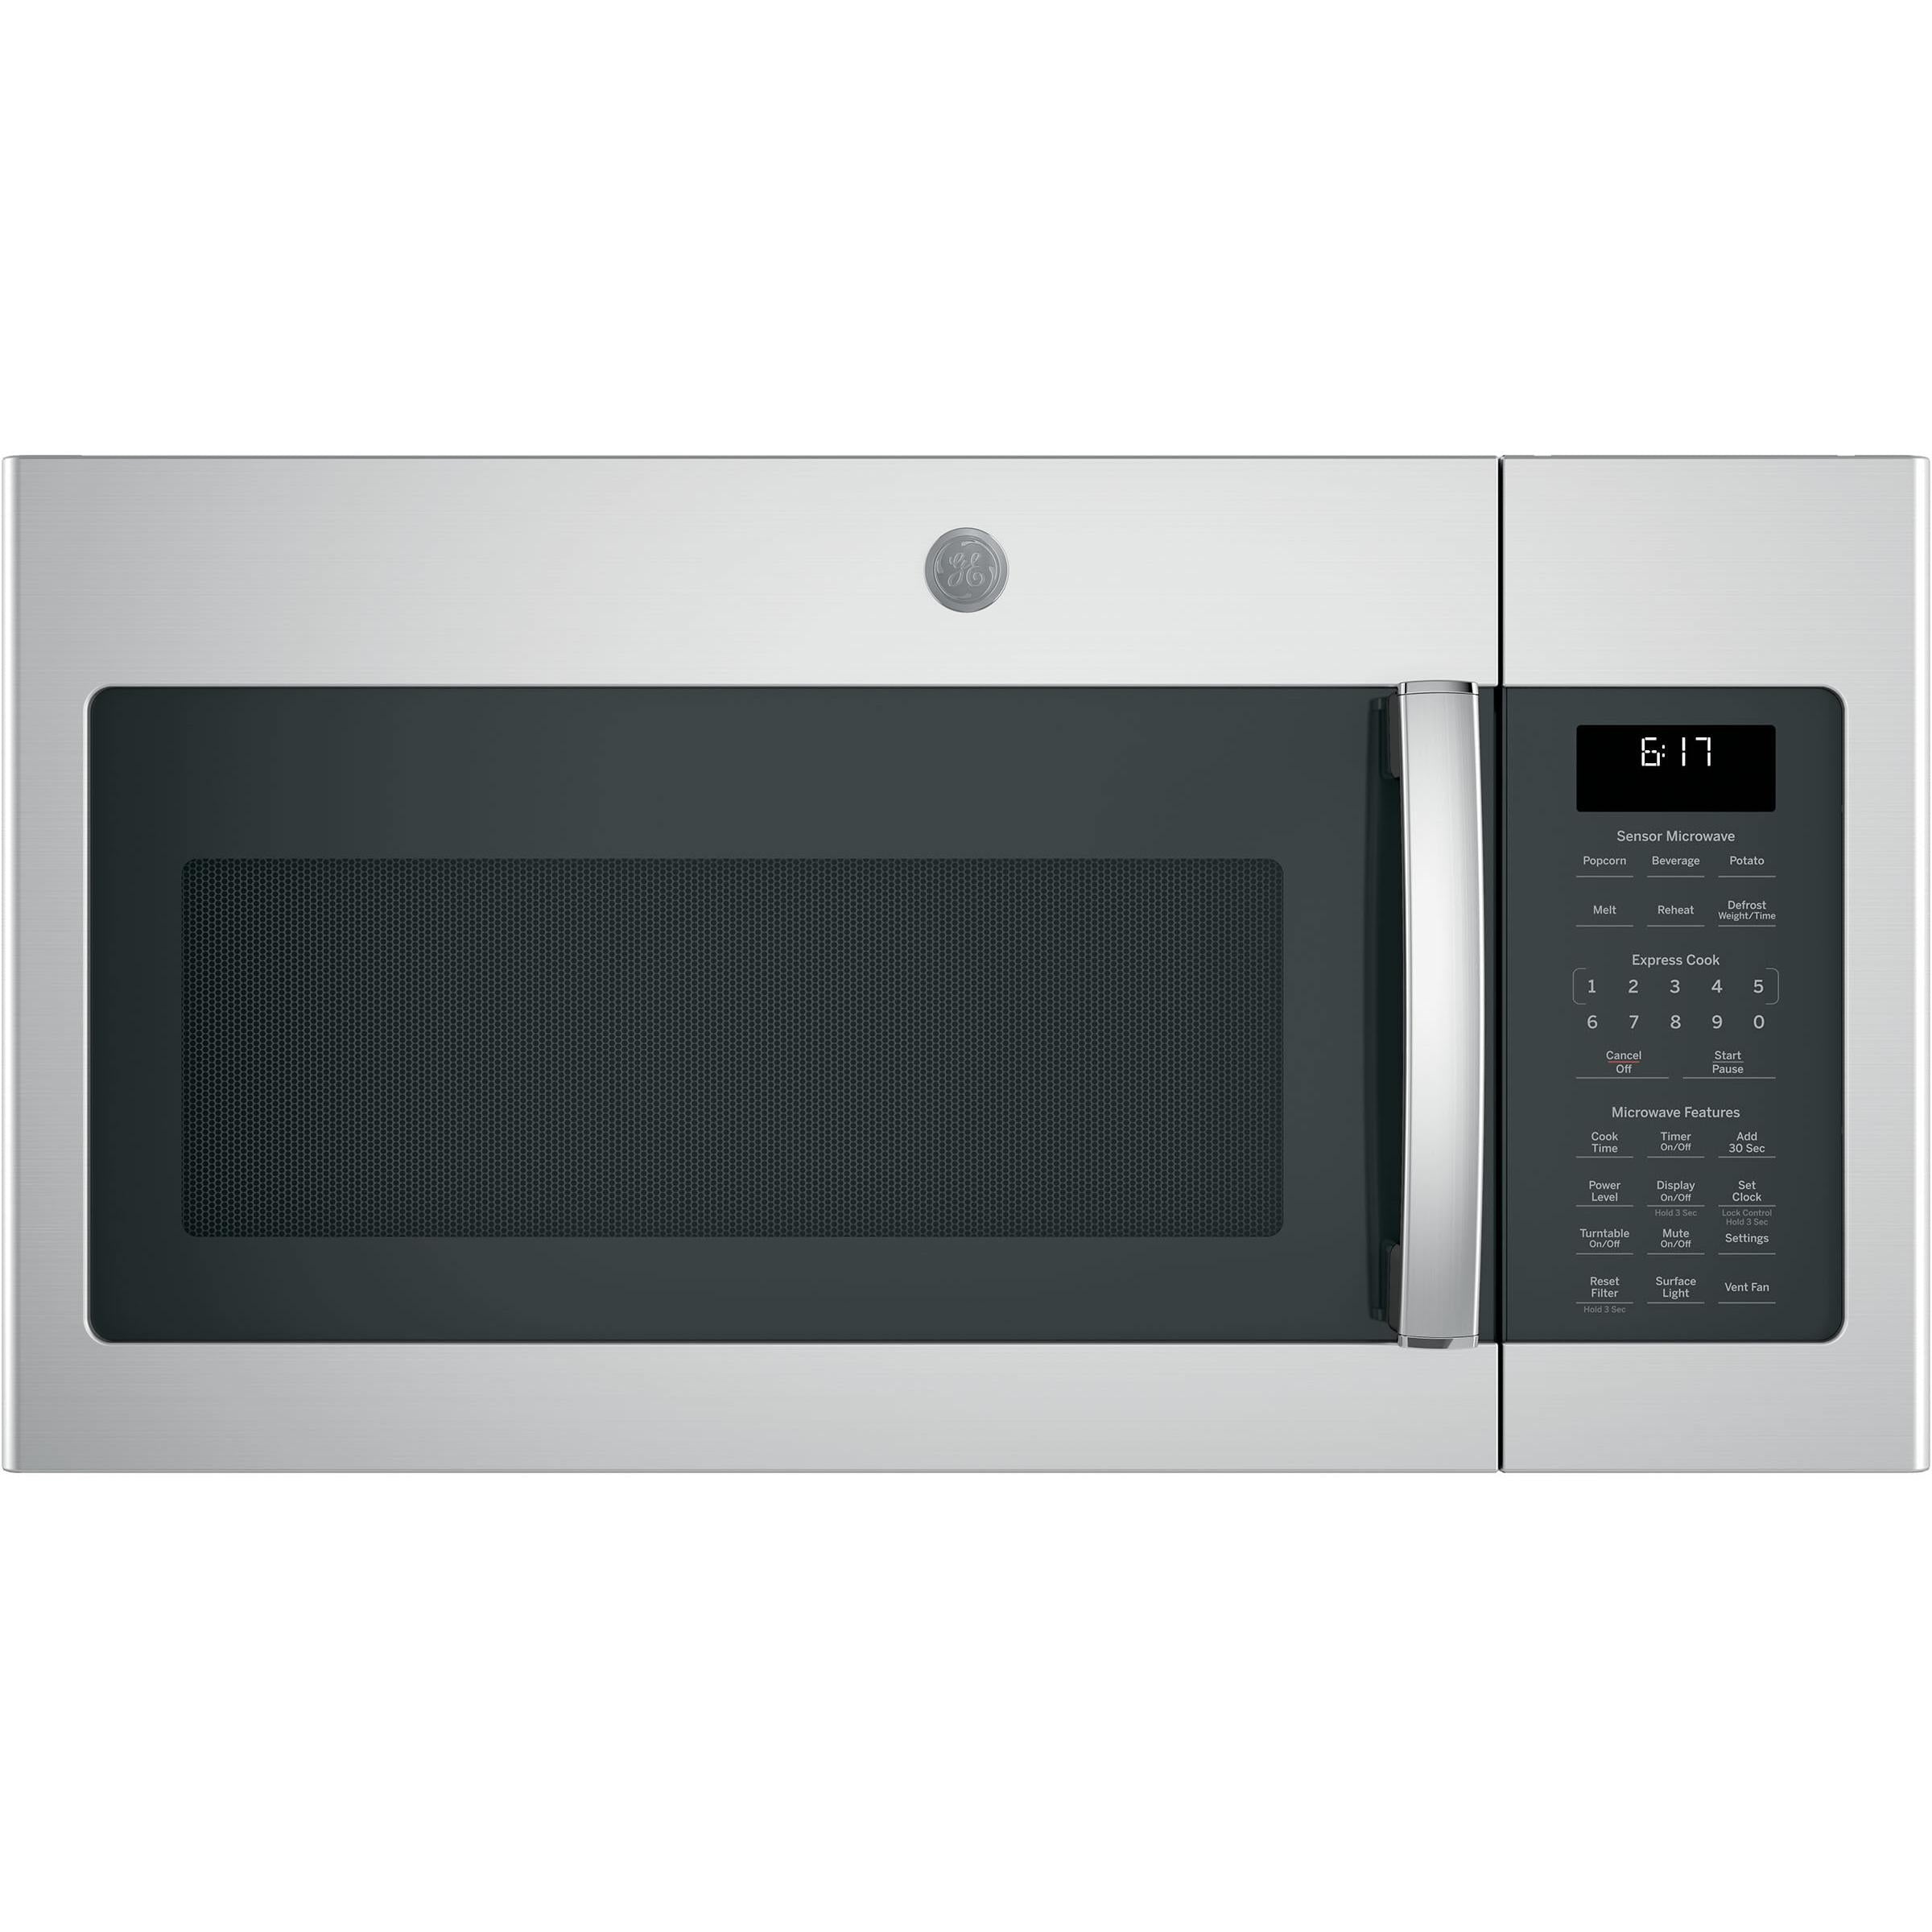 GE 30-inch, 1.7 cu.ft. Over-the-Range Microwave Oven with Sensor Cooking JVM6175YKFS